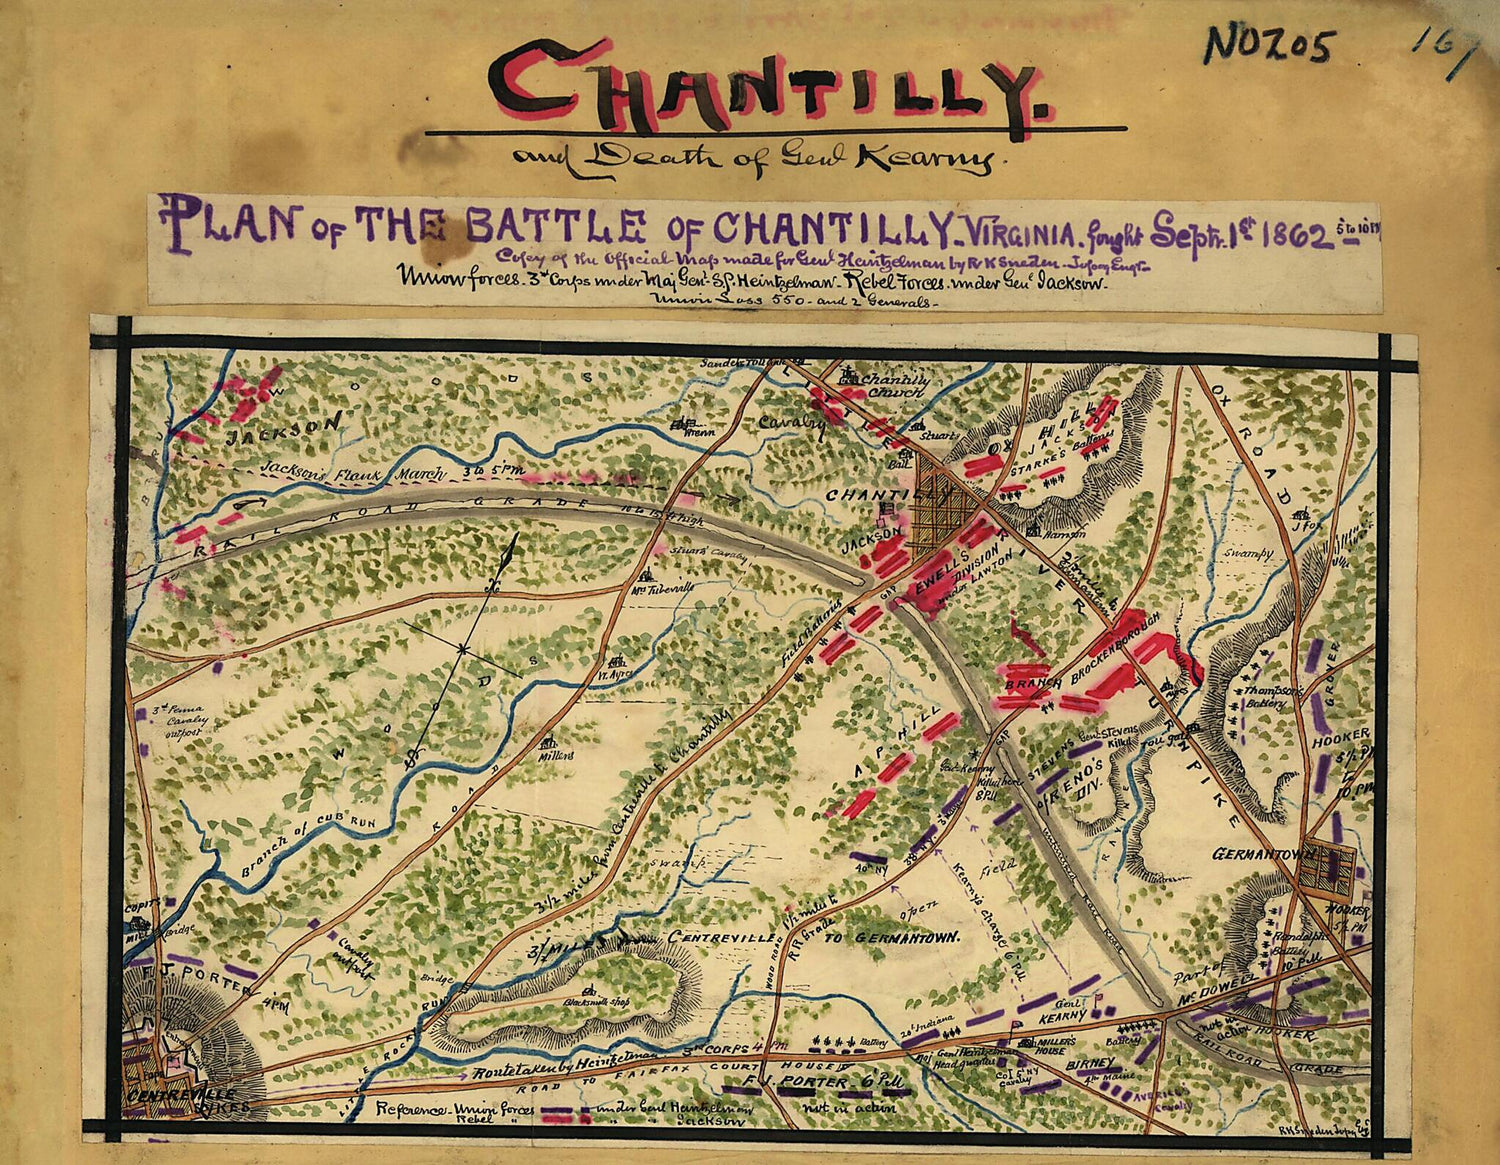 This old map of Plan of the Battle of Chantilly, Virginia. Fought Septr. 1st 1862, 5 to 10 PM from 09-01 was created by Robert Knox Sneden in 09-01